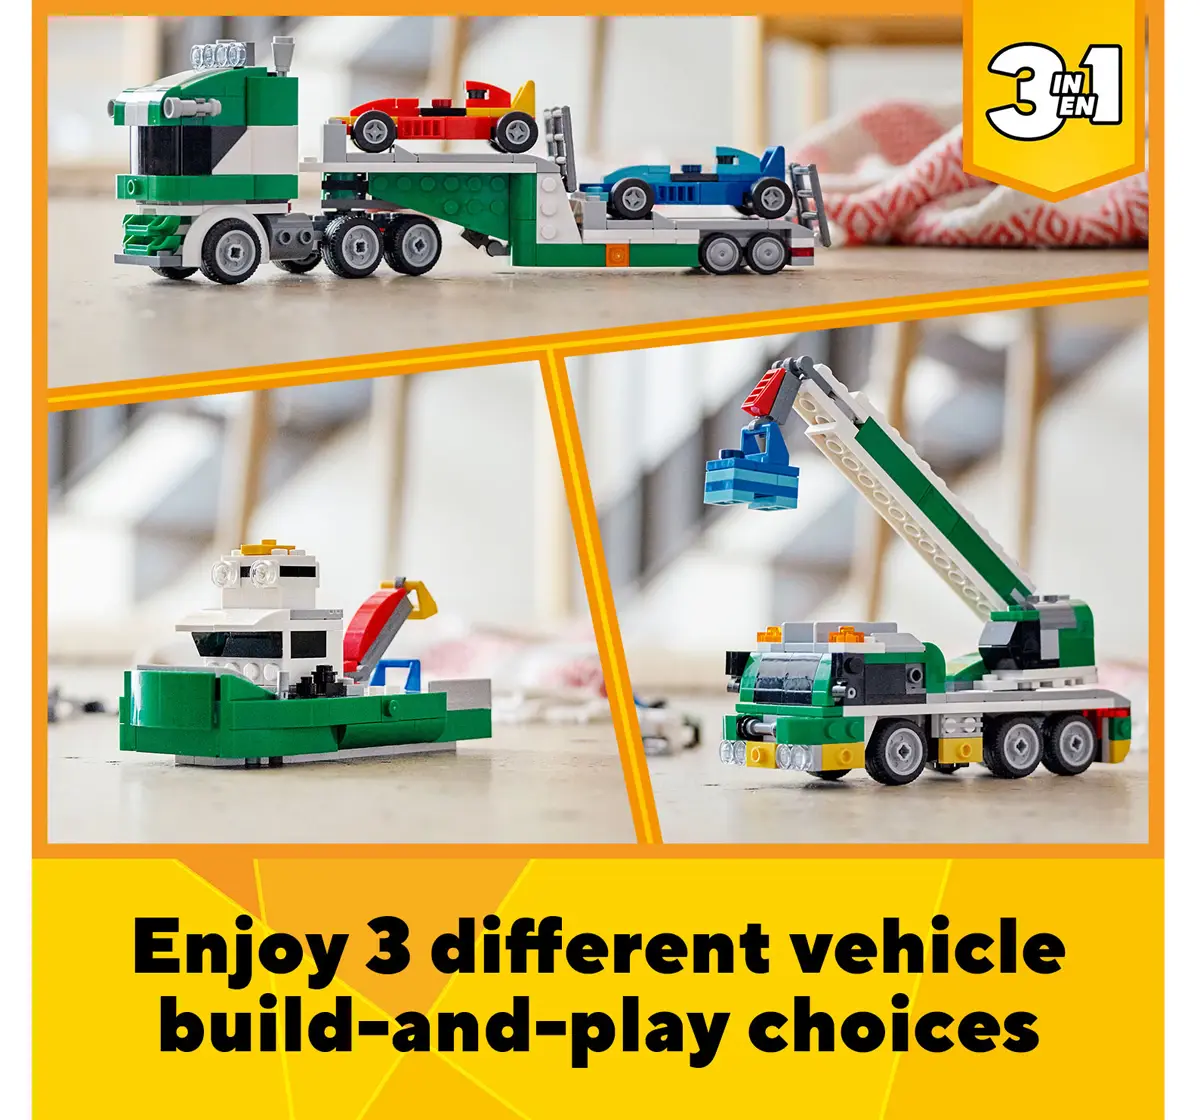 Lego Creator 3in1 Race Car Transporter Building Kit  Makes a Great Gift for Kids Who Love Fun Toys and Creative Building, (328 Pieces)